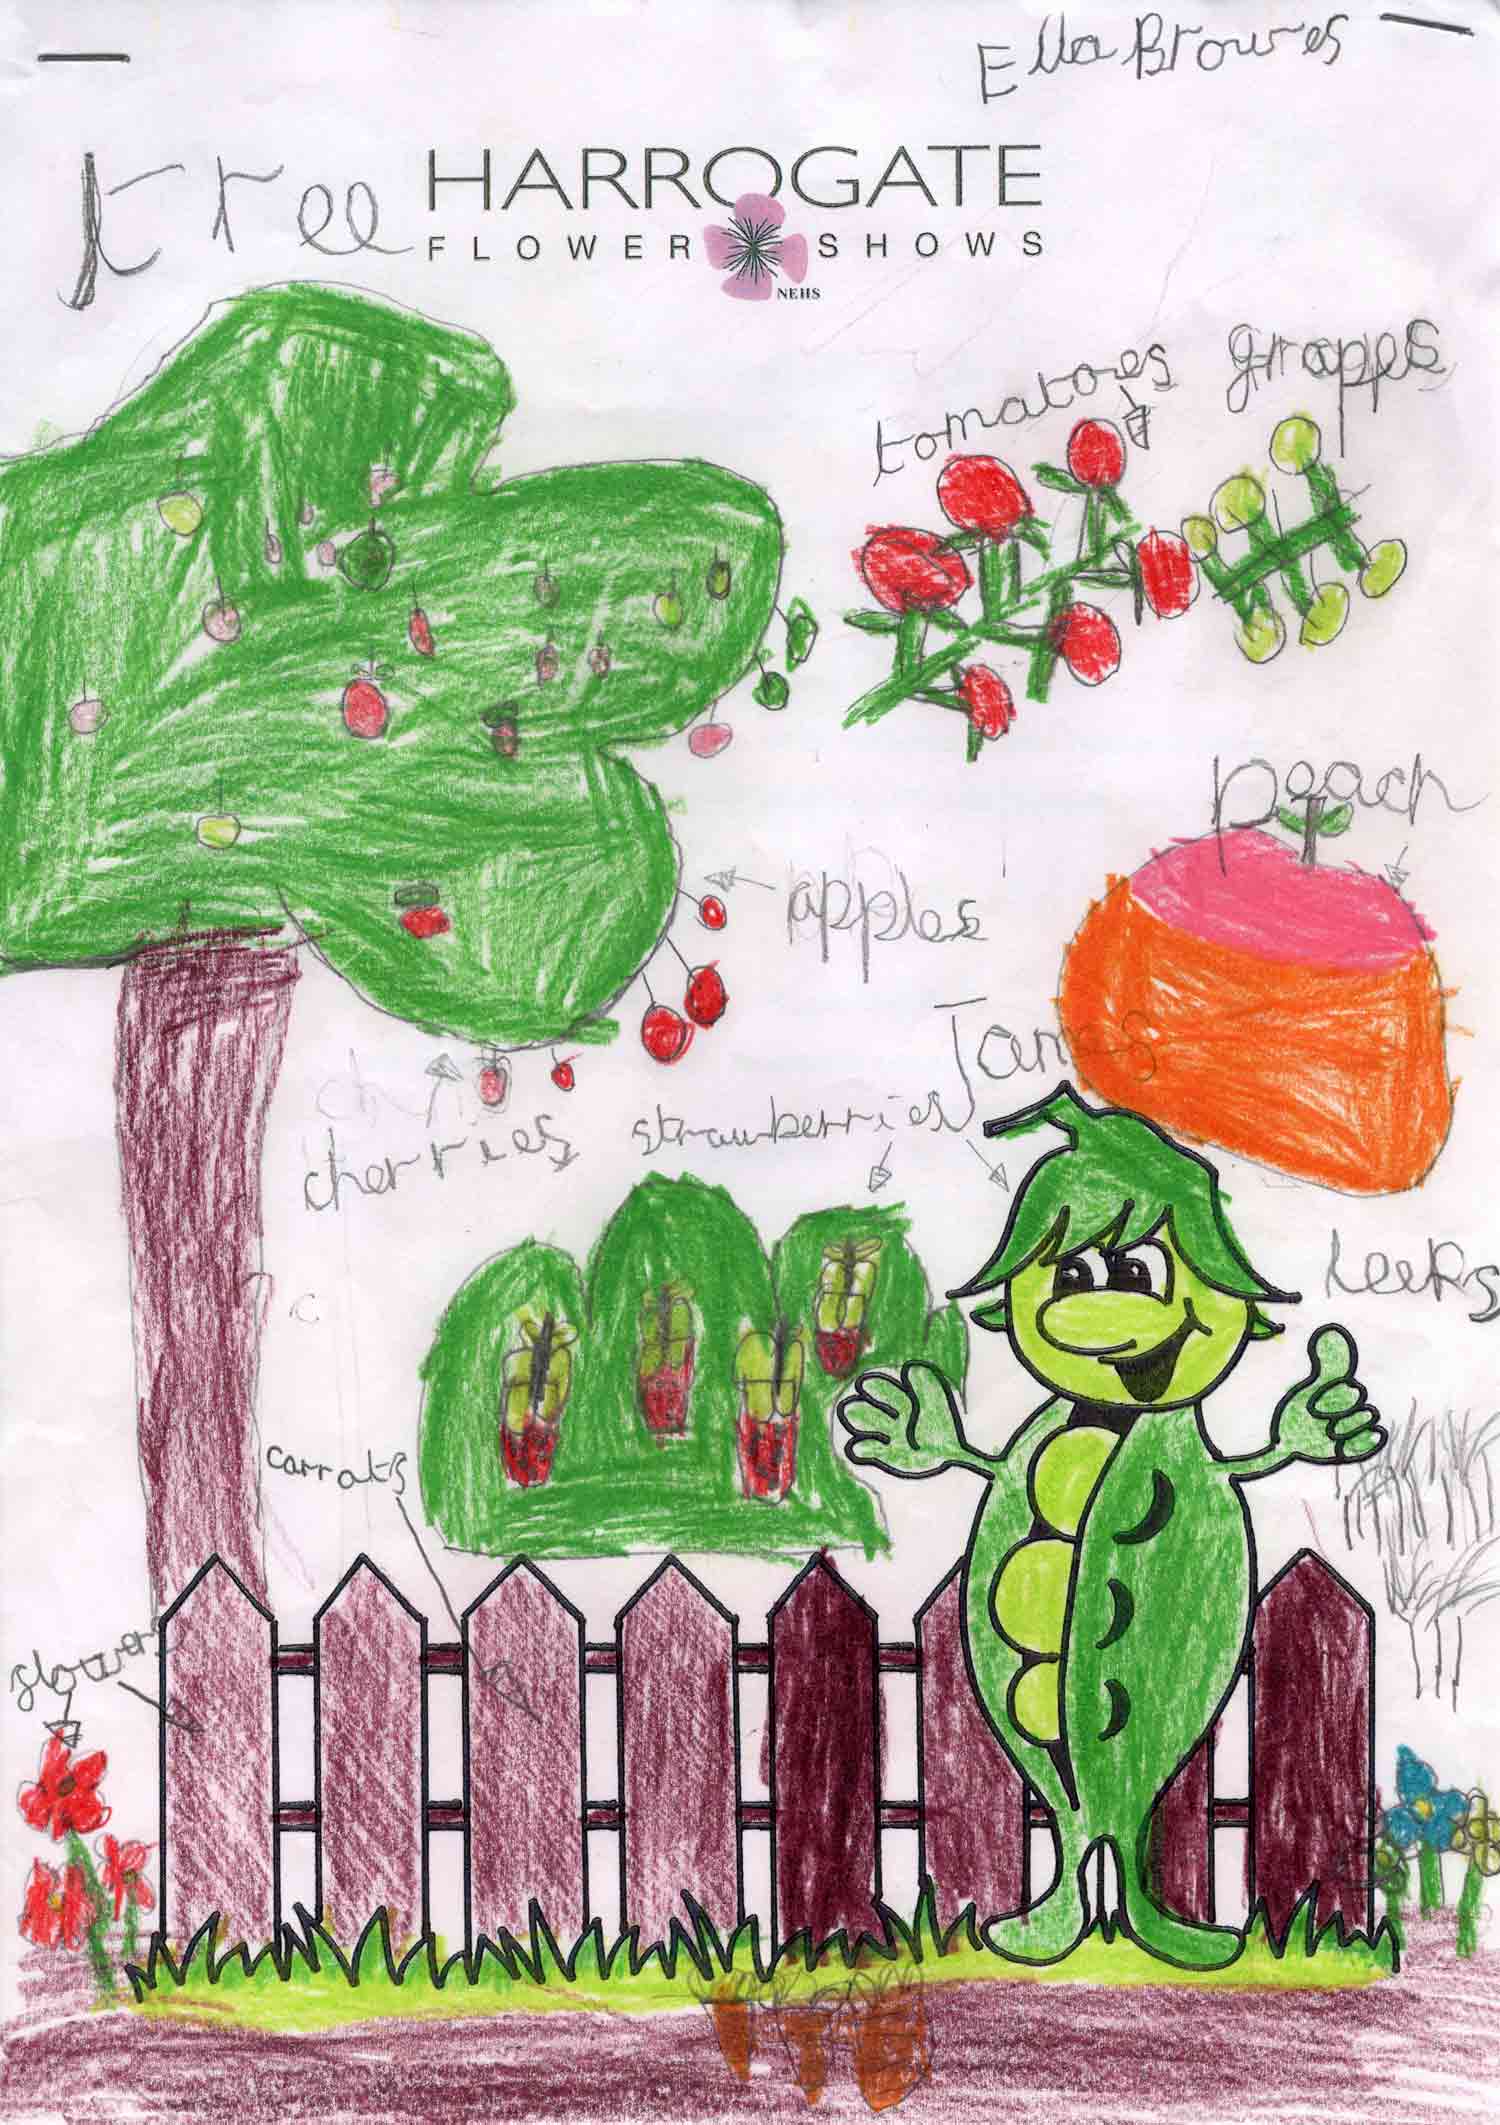 Ella Browes, Ashville Pre-Prep School winning picture for Key Stage 1 category